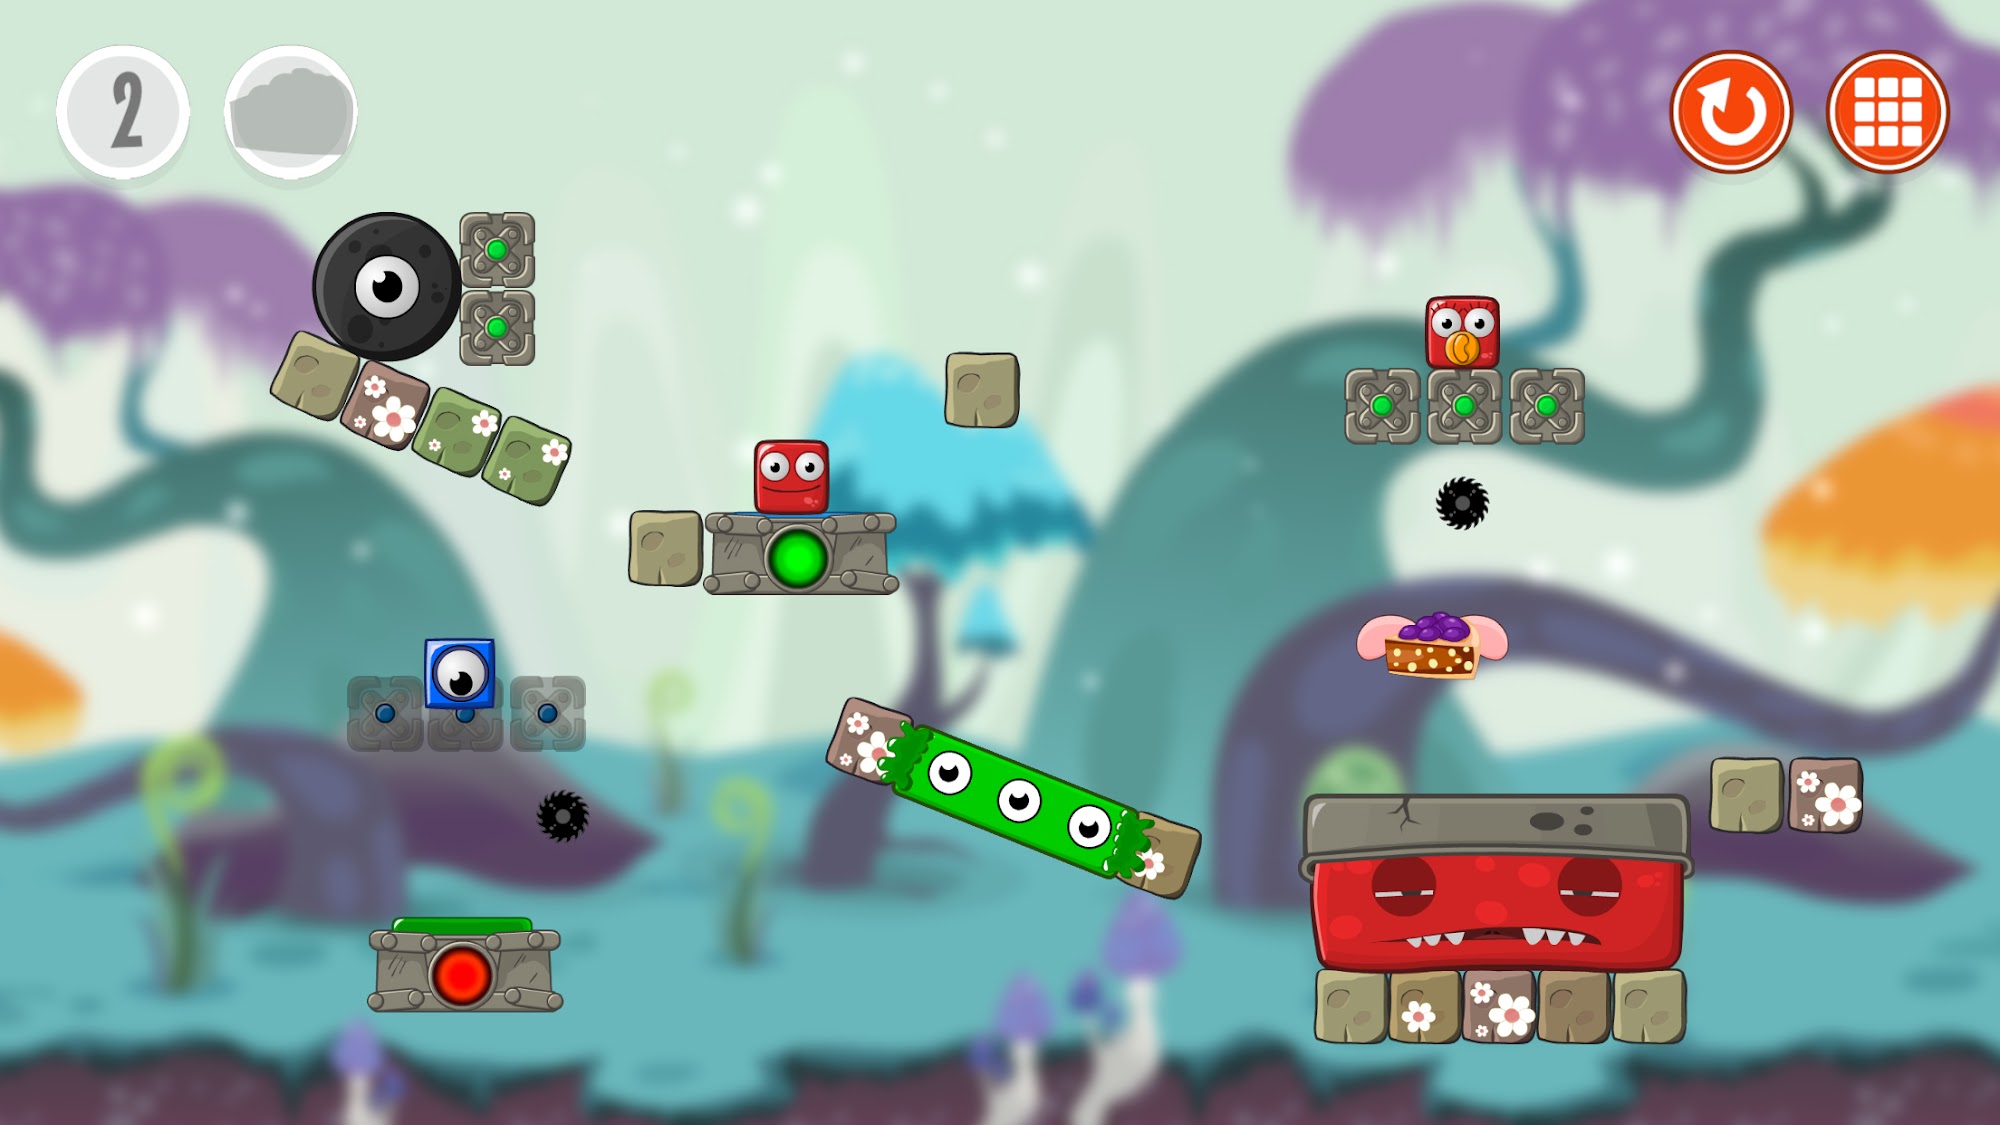 Gameplay of the Monsterland 2. Physics puzzle game for Android phone or tablet.